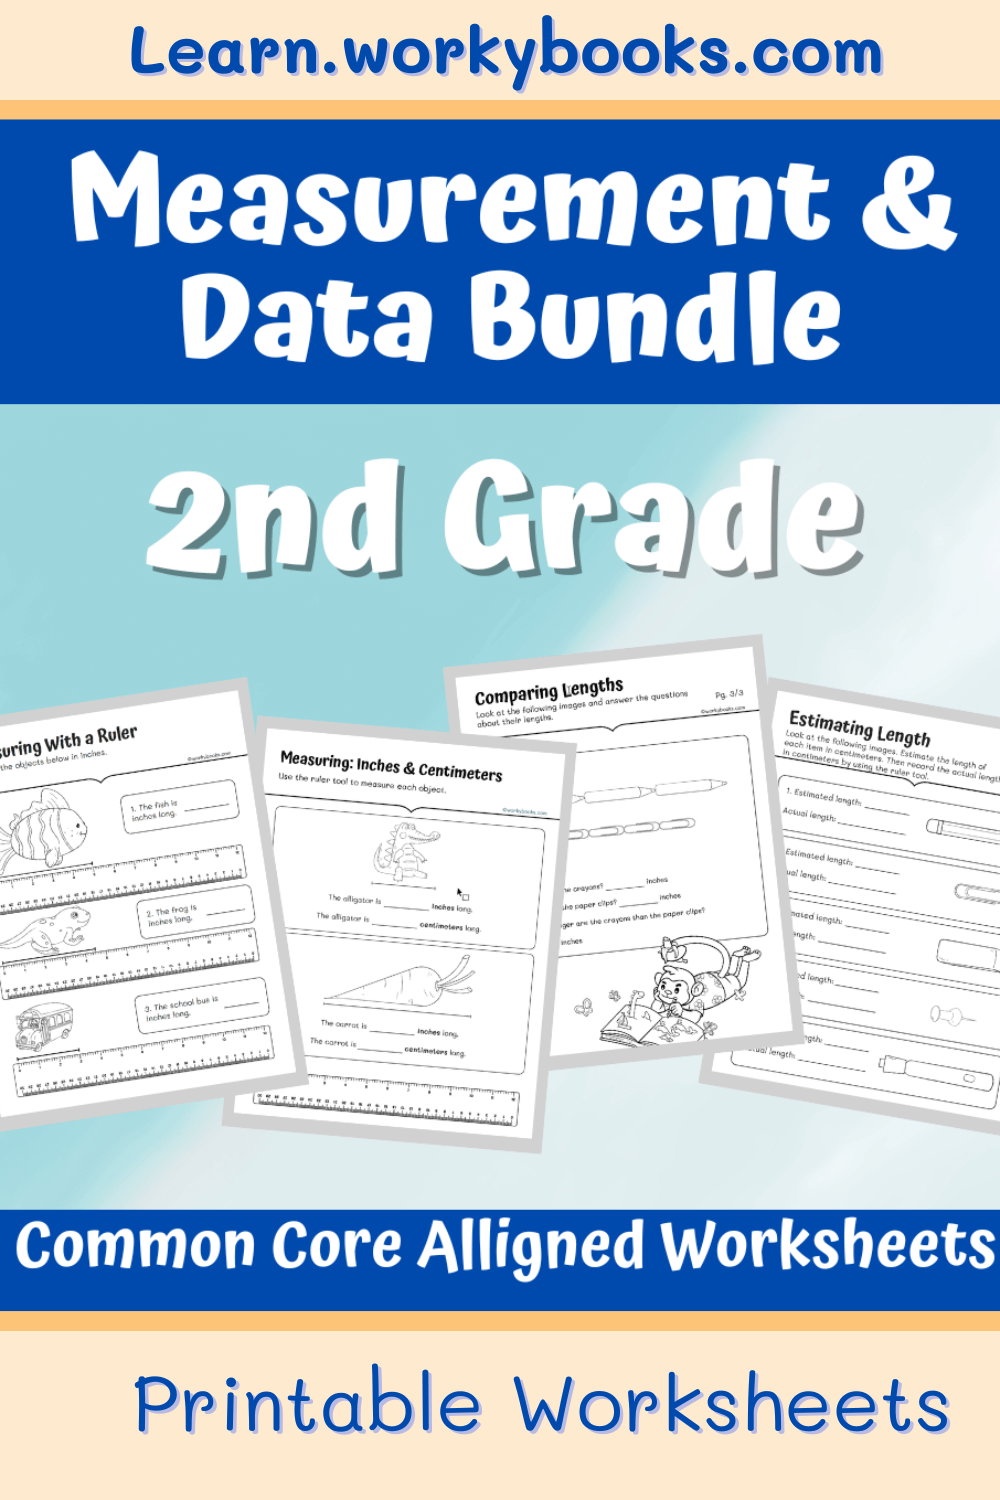 2nd grade measurement and data worksheets